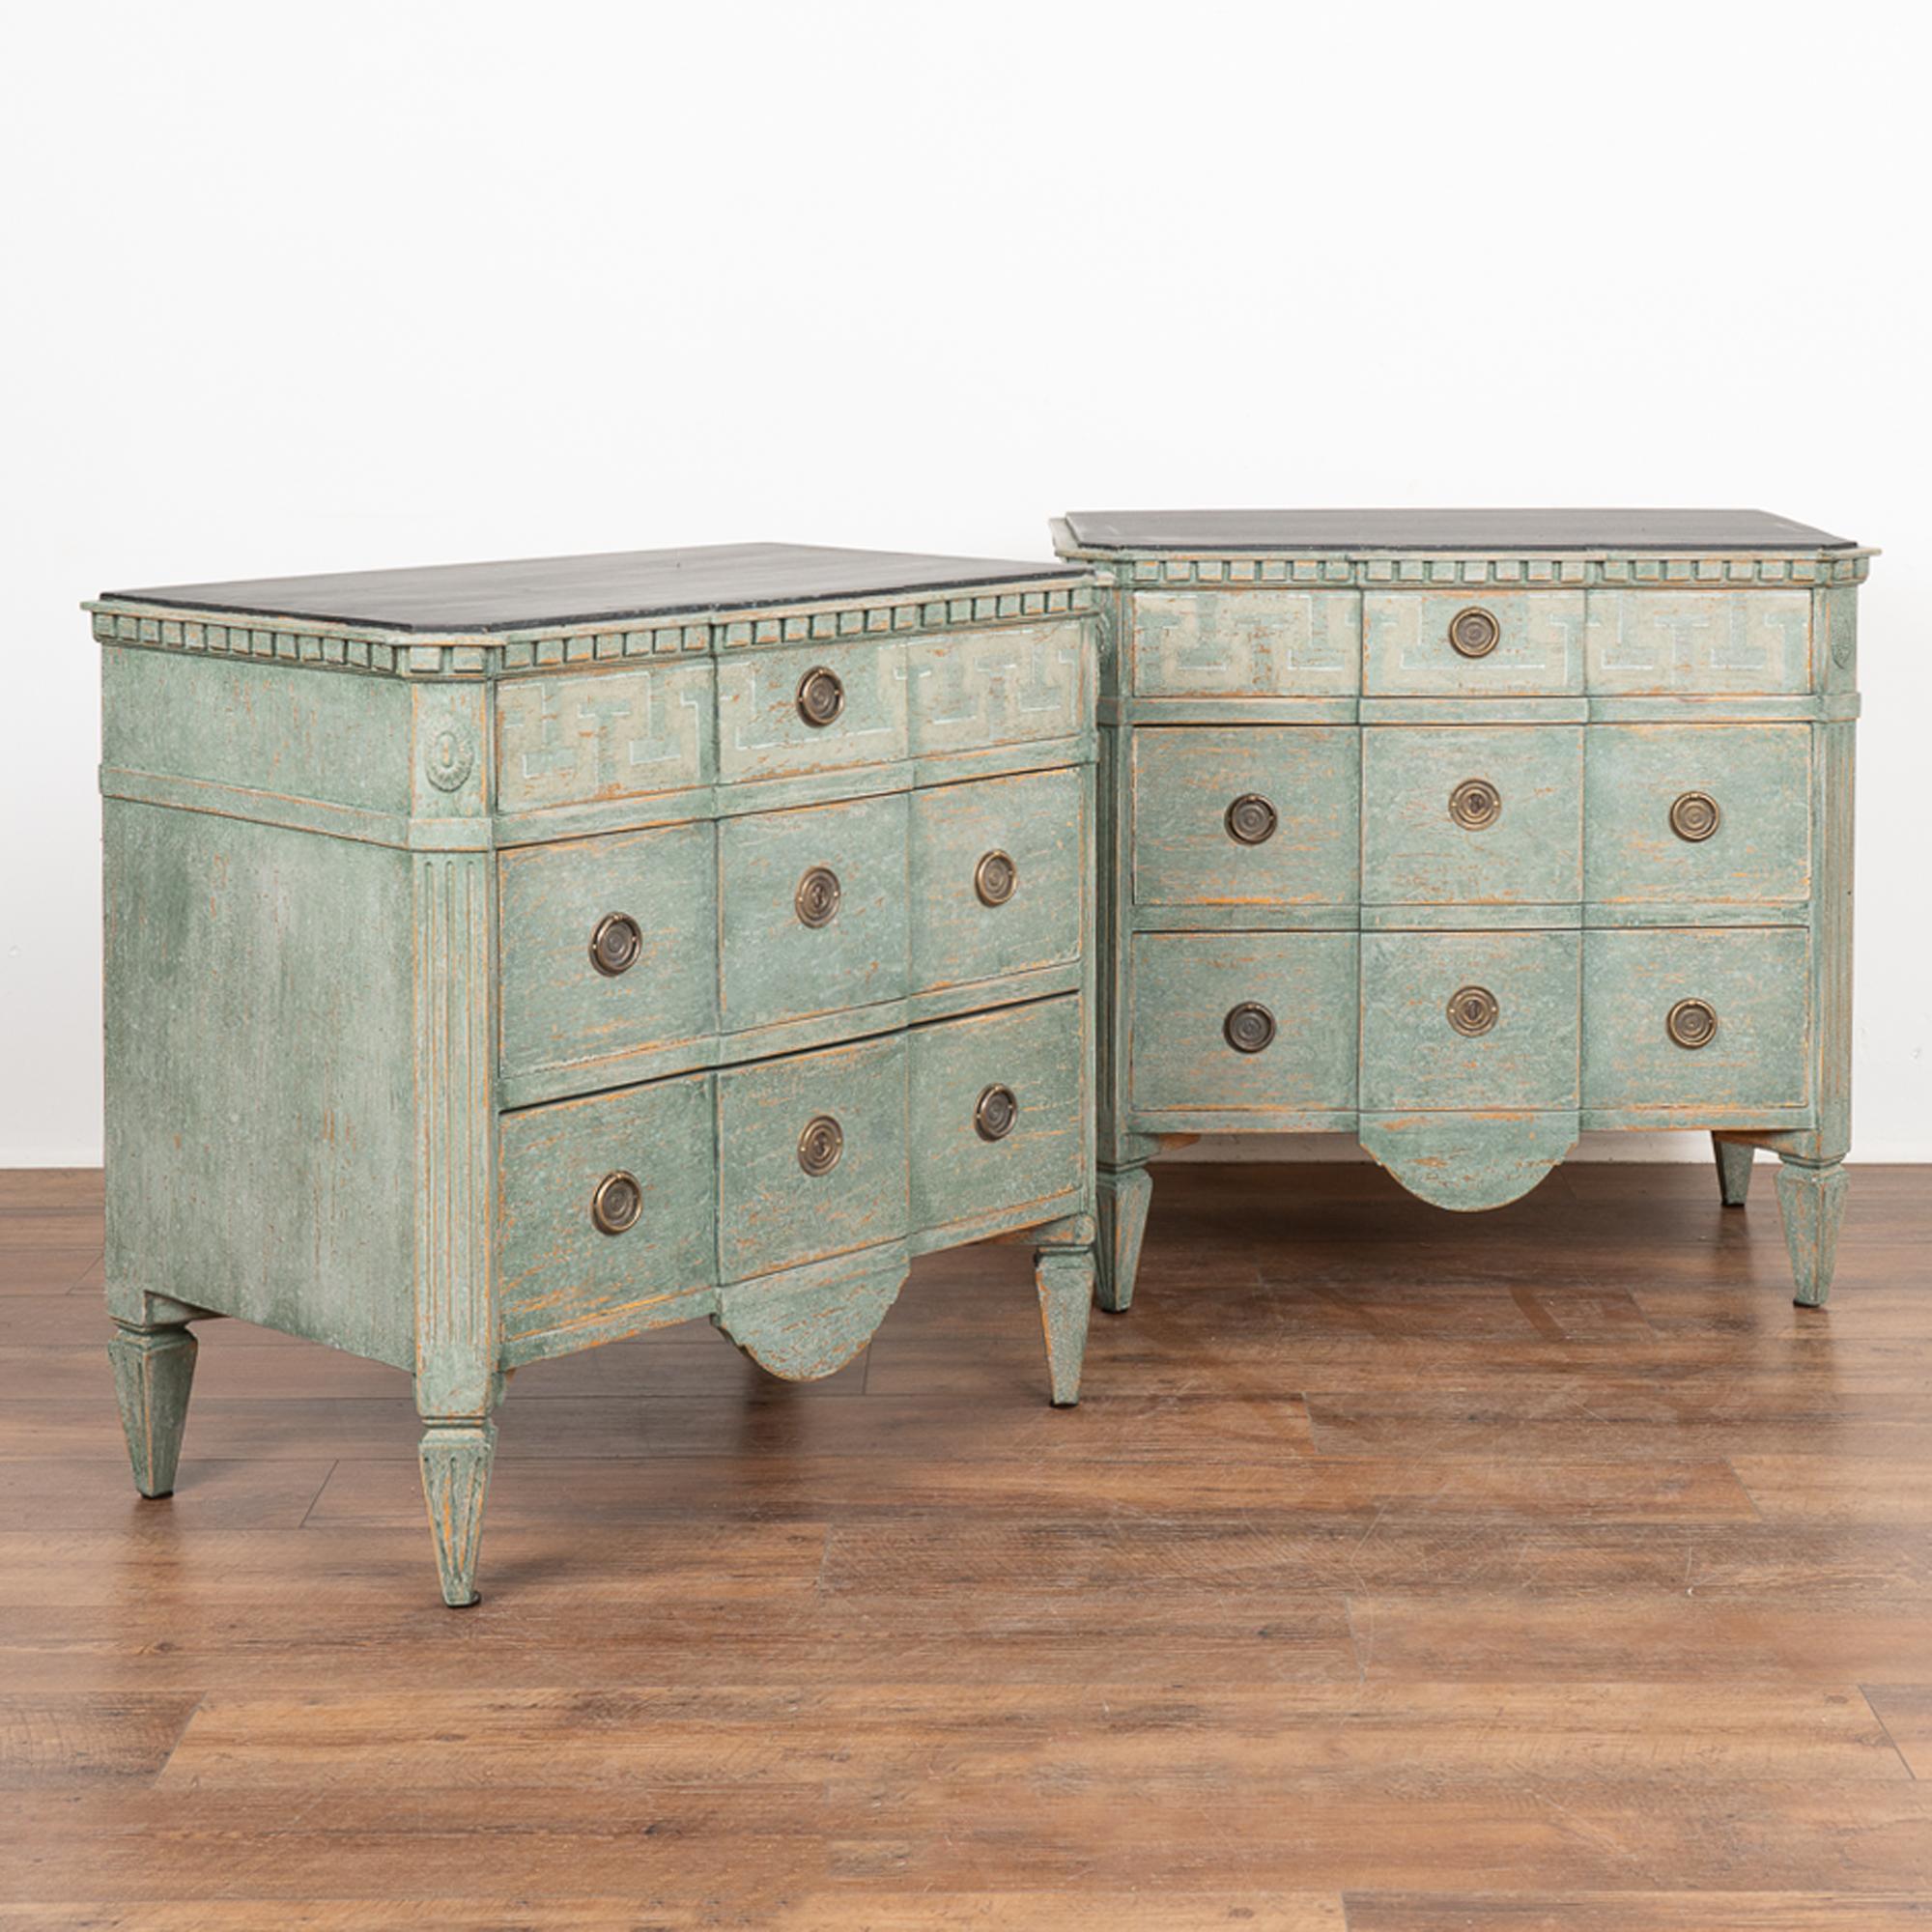 A pair of decorative pine Gustavian chest of three drawers with traditional dentil molding; upper drawer decorated with lightly painted Greek key motif. 
Restored, later professionally painted in layered shades of teal blues and greens with